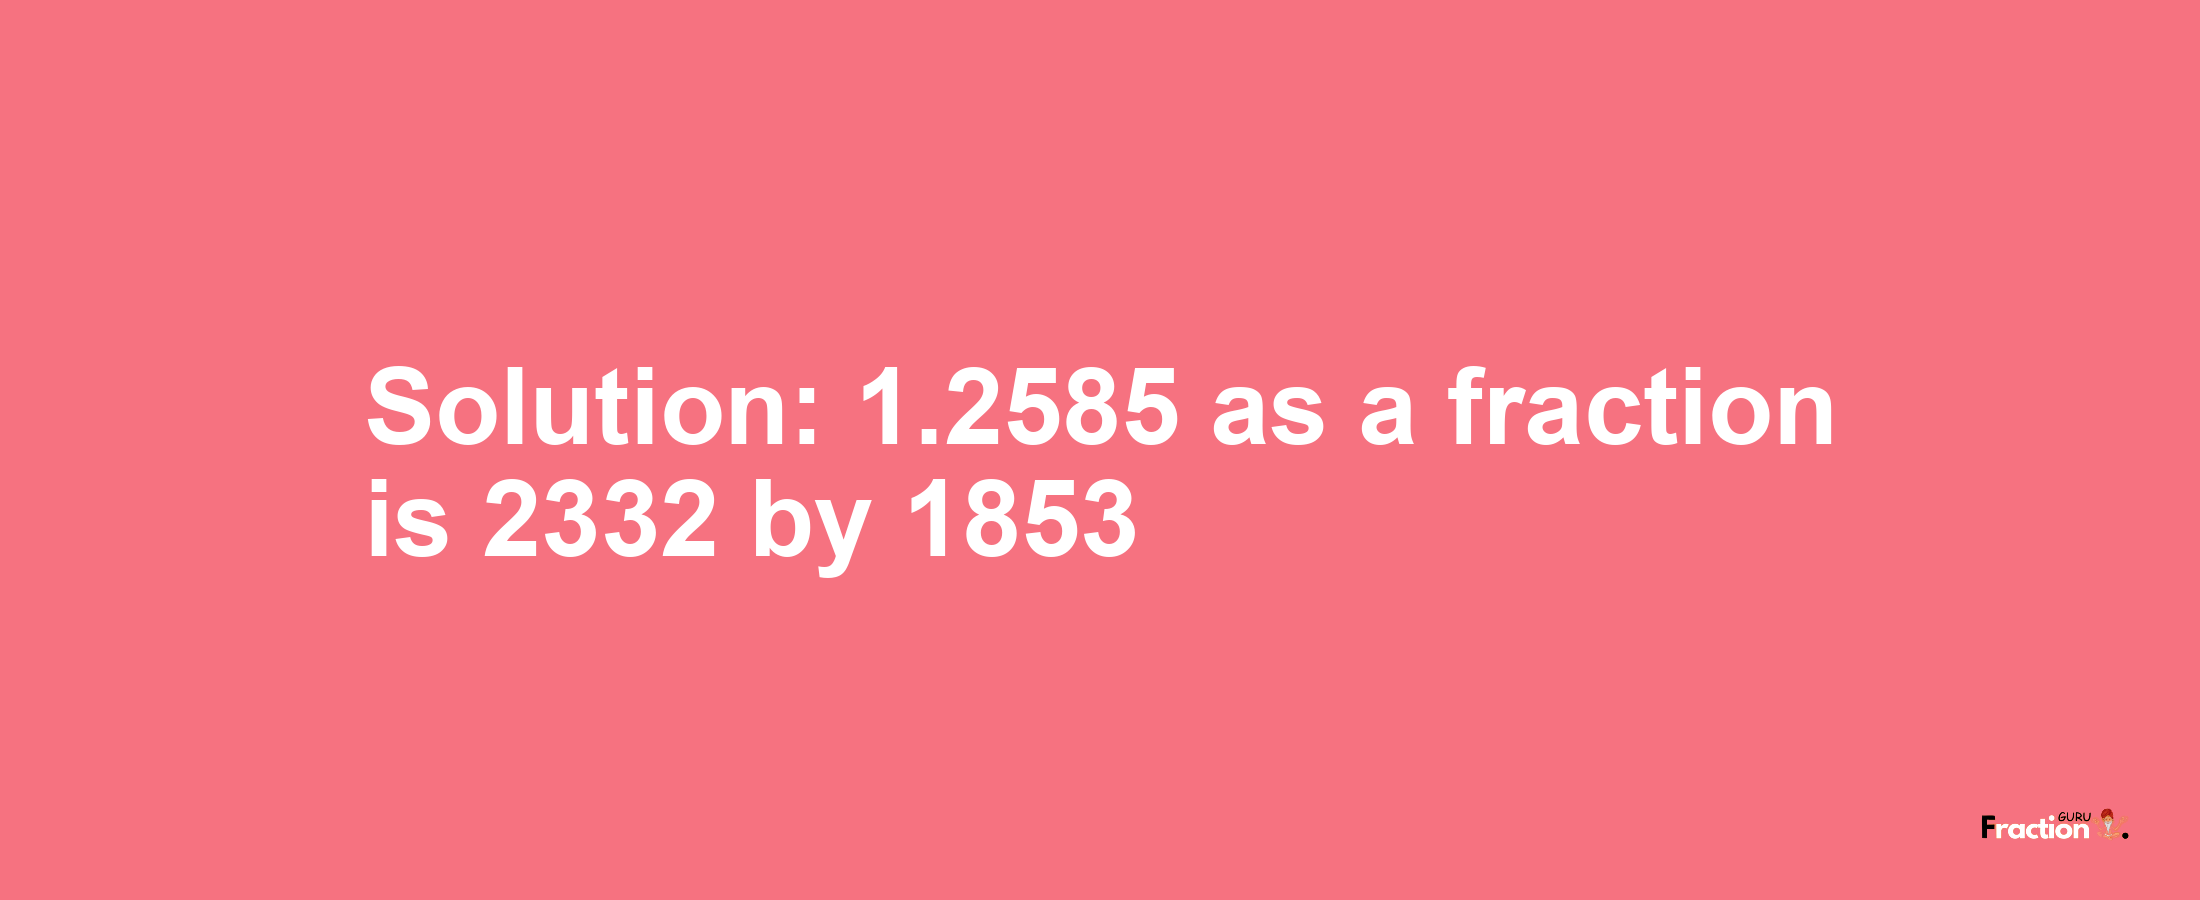 Solution:1.2585 as a fraction is 2332/1853